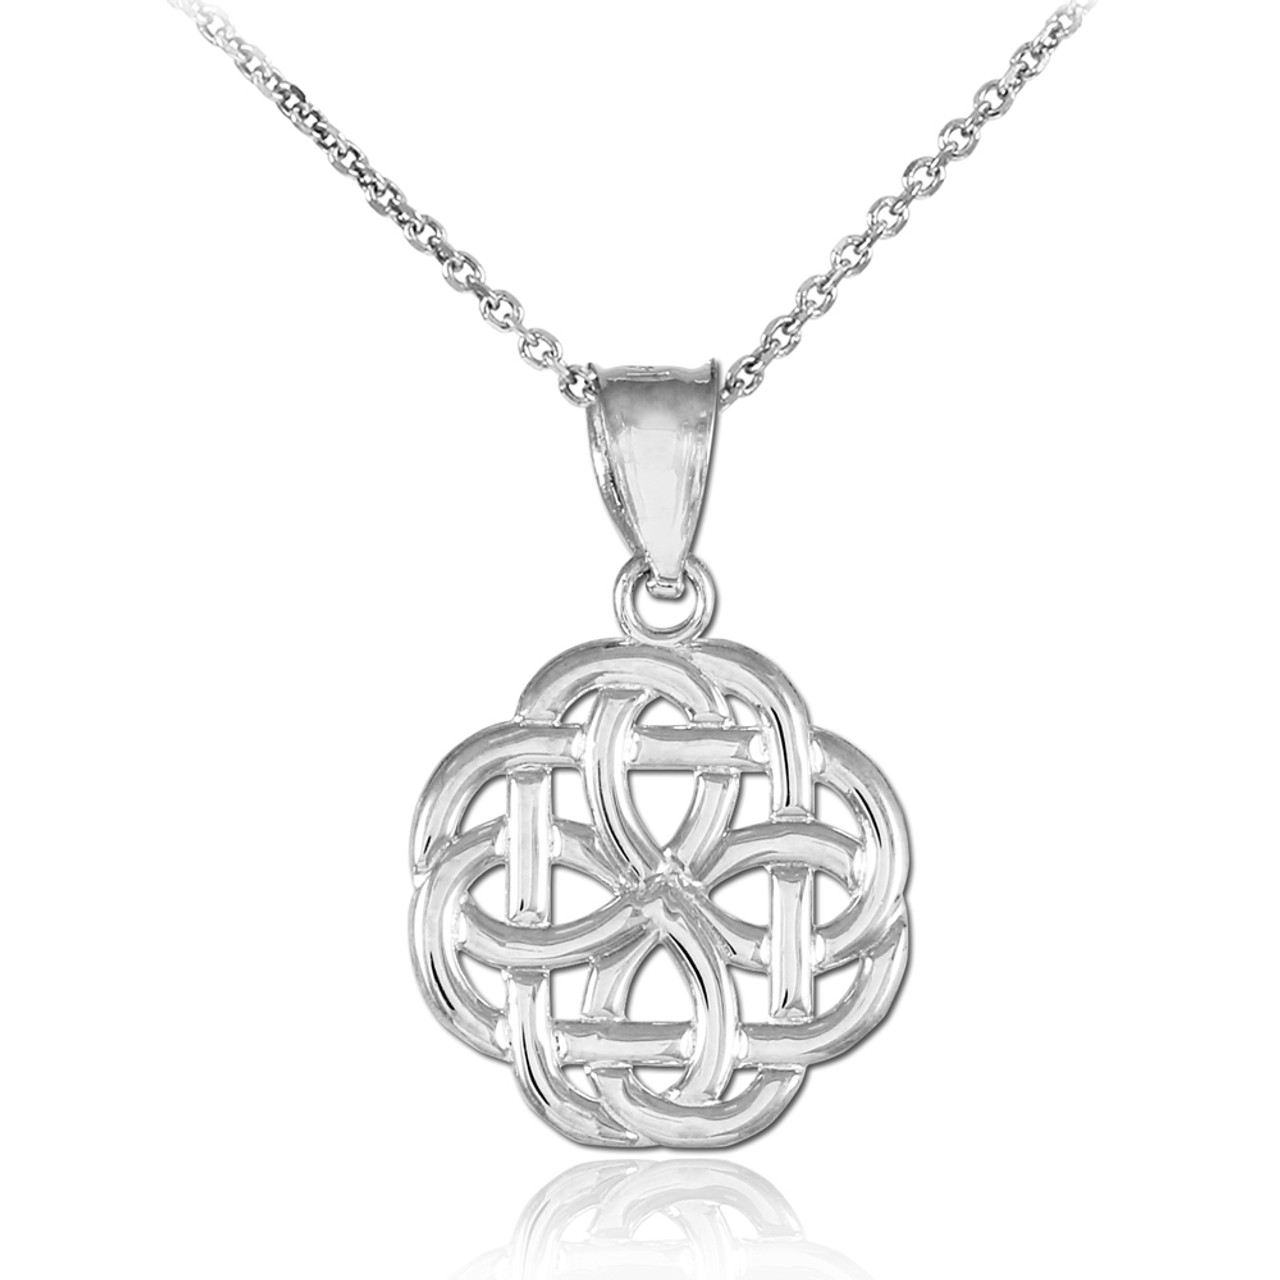 Sterling Silver Pendant Necklace - Celtic Knot Round